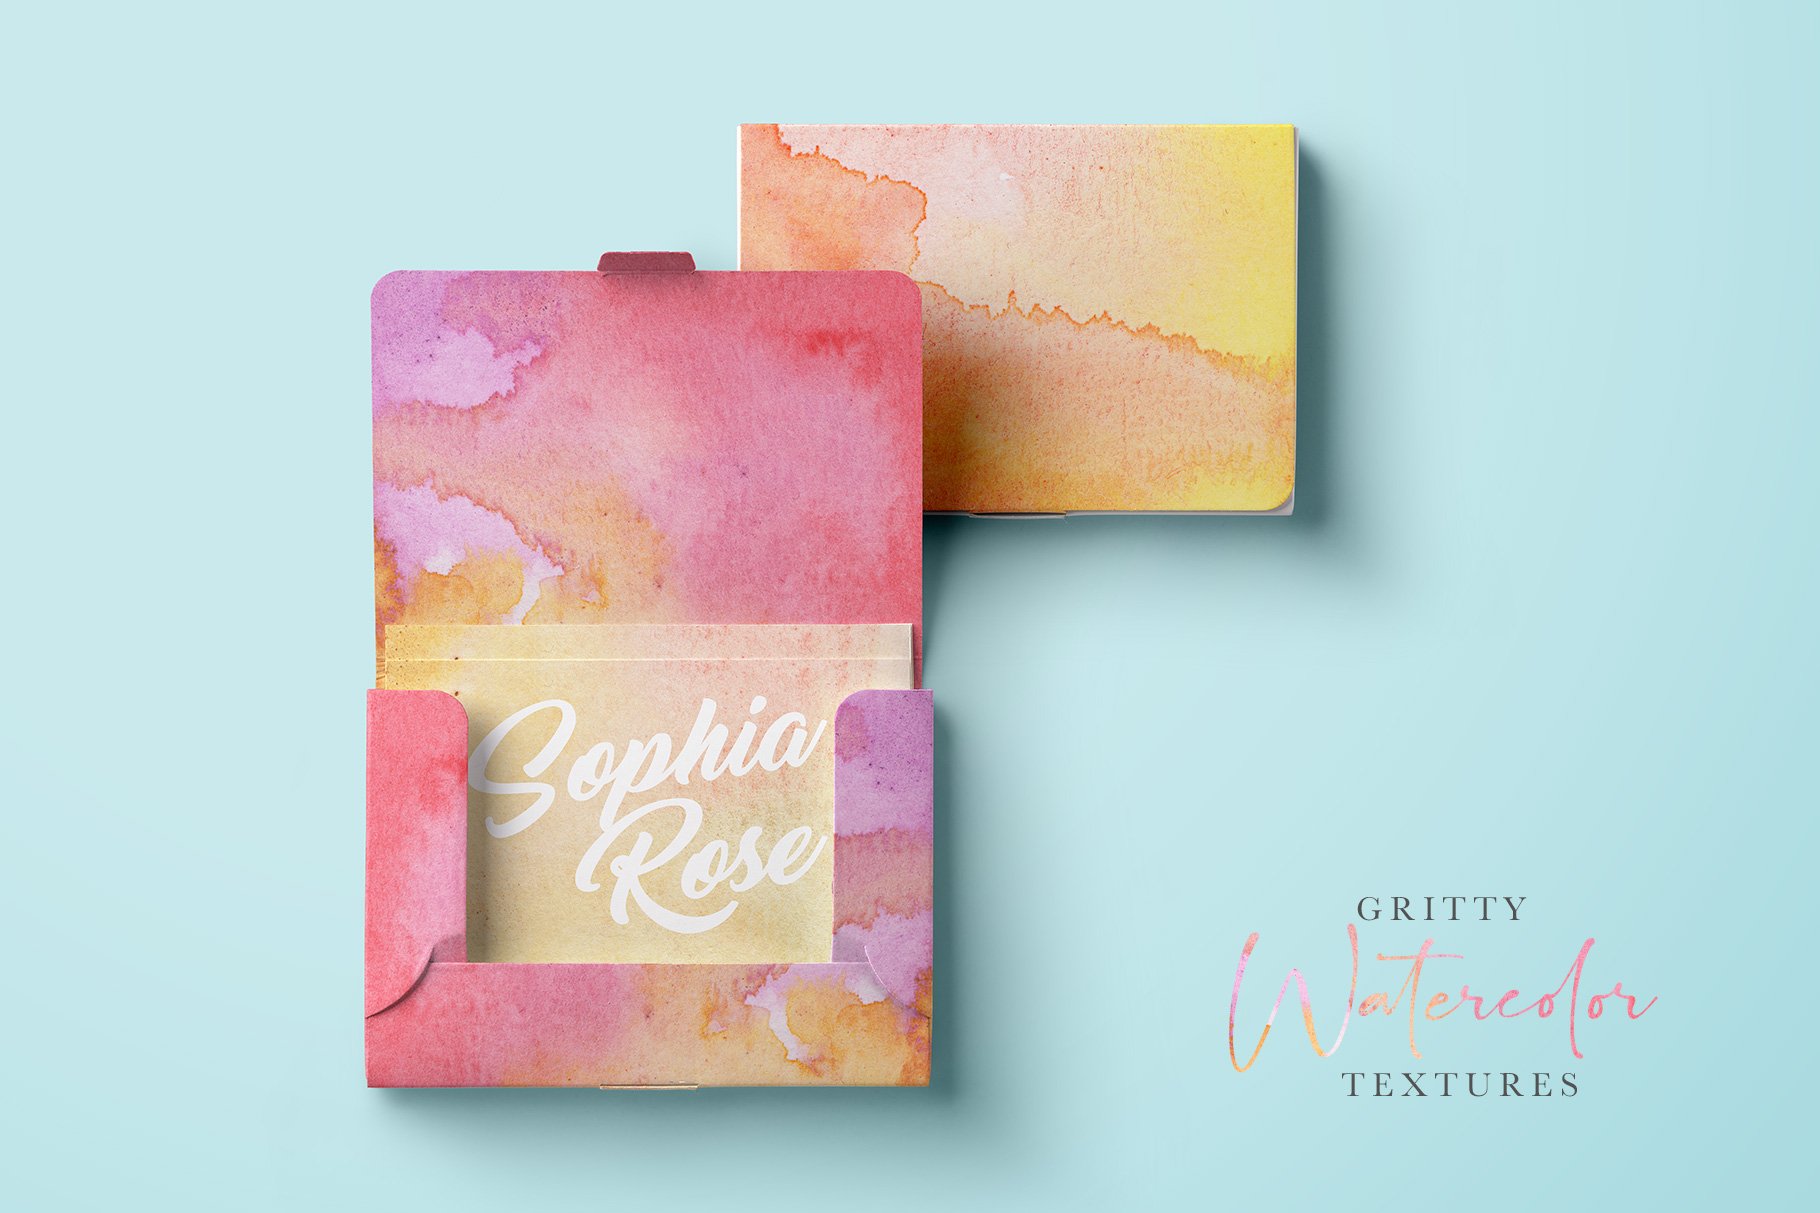 Gritty Watercolor Textures Vol 3 - Fairytale